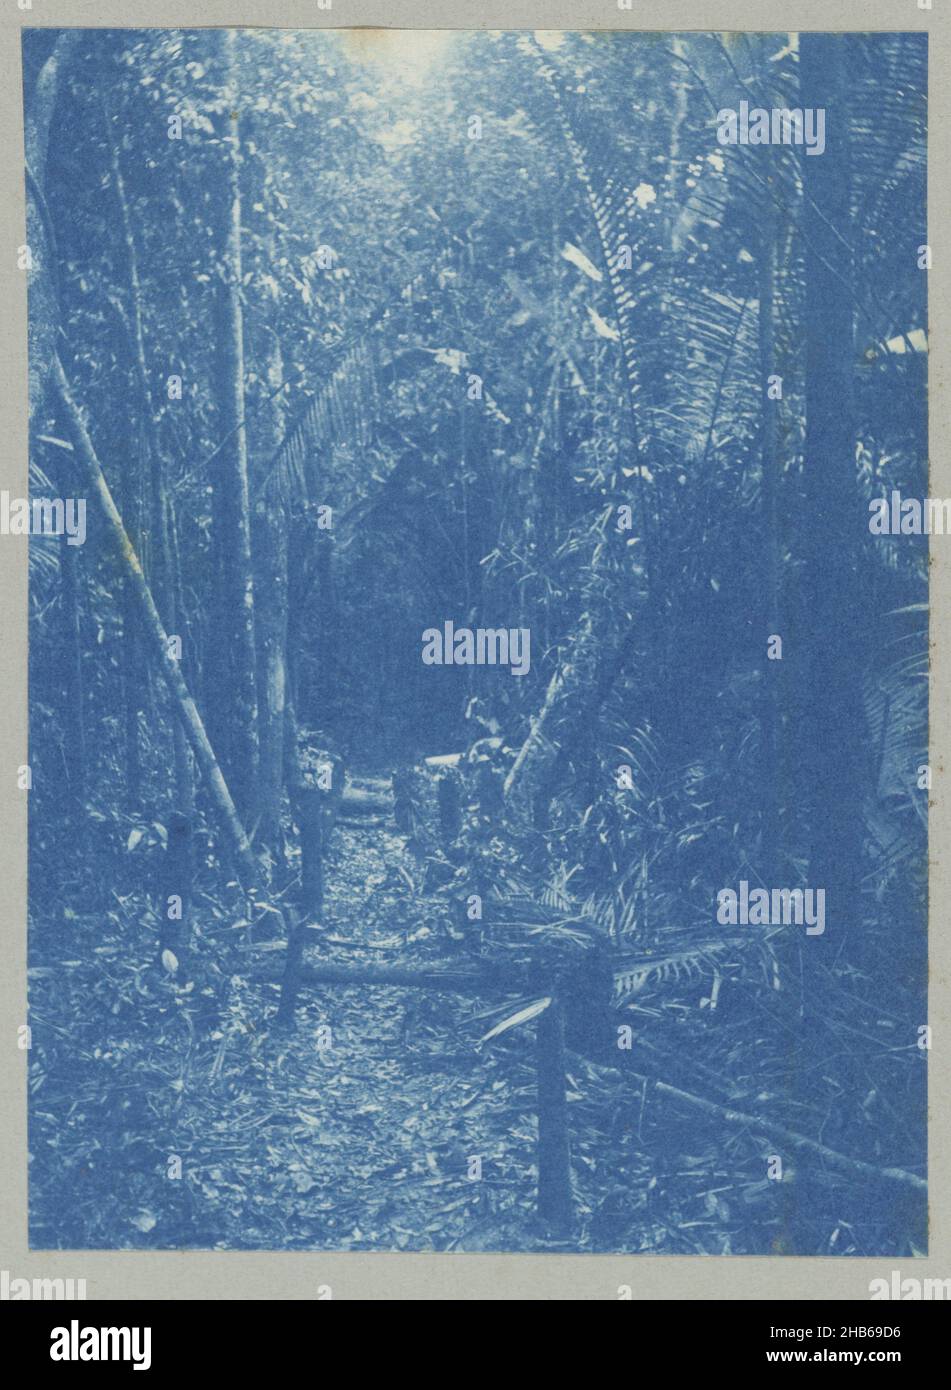 Measuring line at the Witwatra (title on object), Measuring line in the jungle. Part of the photo album Souvenir de Voyage (part 1), about the life of the Doijer family in and around the plantation Ma Retraite in Suriname in the years 1906-1913., Hendrik Doijer (attributed to), Suriname, 1906 - 1913, photographic support, cyanotype, height 108 mm × width 80 mm Stock Photo